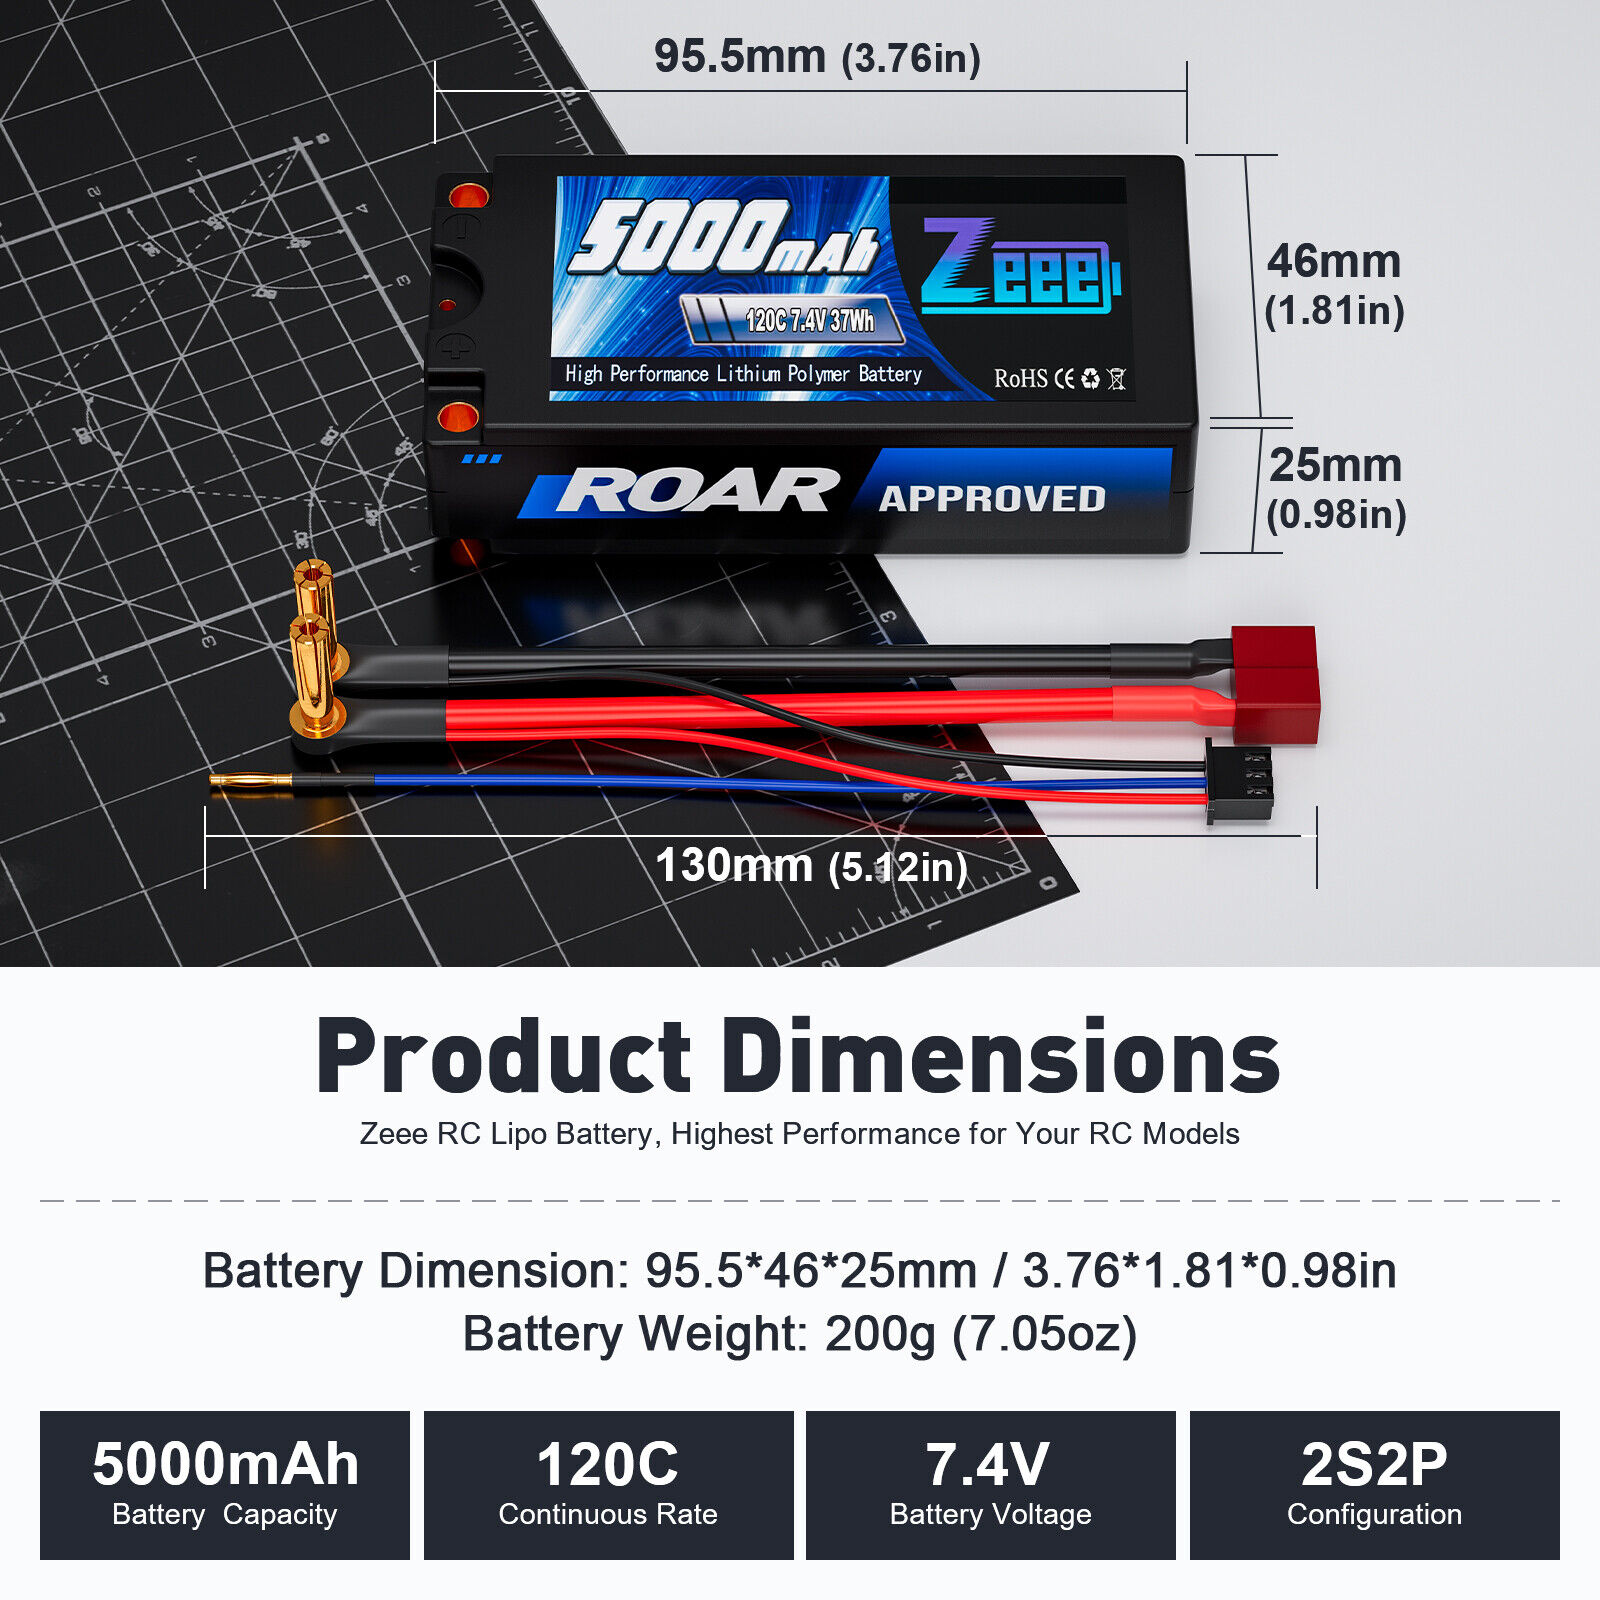 2x Zeee 2S Lipo Battery 5000mAh 7.4V 120C 5mm Bullet to Deans Shorty for RC Car ZEEE Does Not Apply - фотография #3